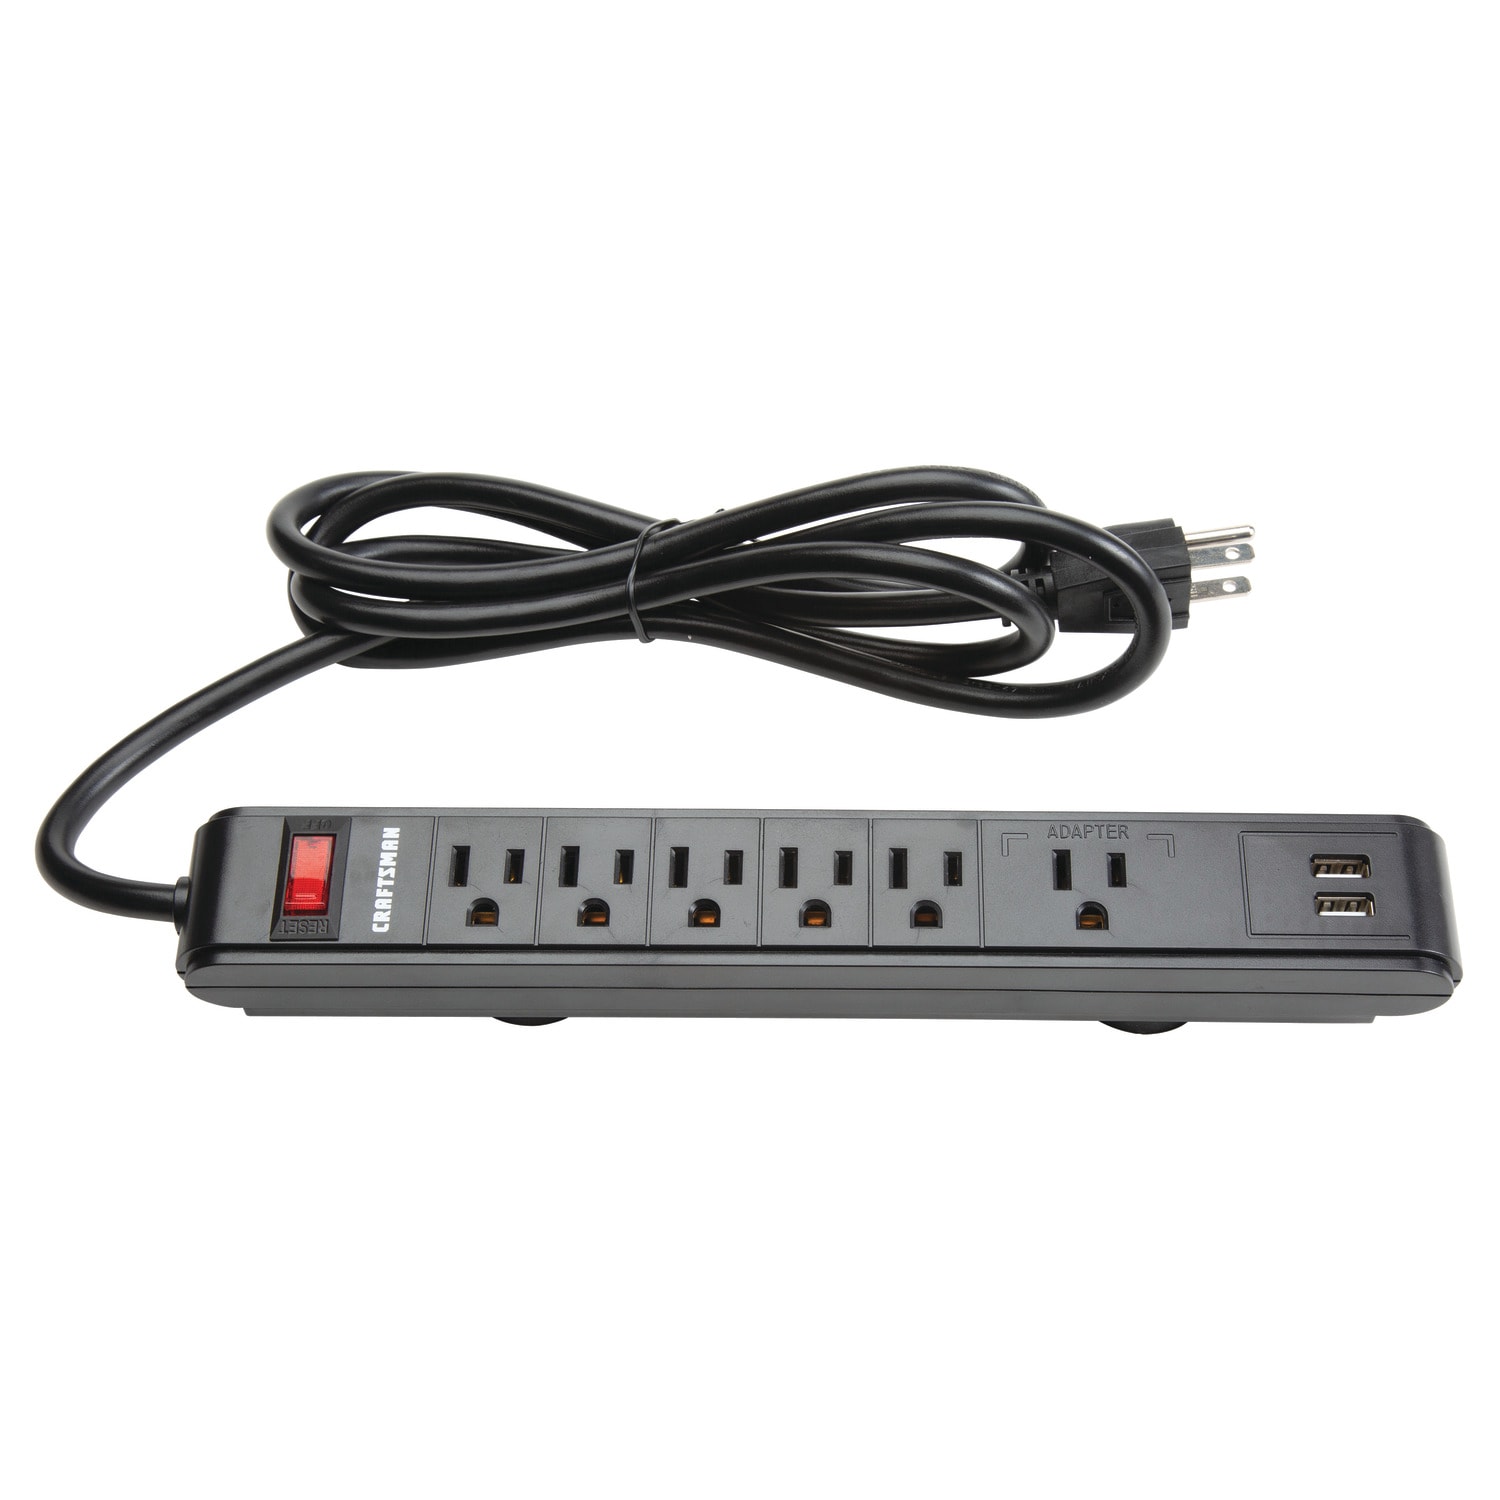 Surge Protector, 5 Outlet Metal, 2 USB Ports, 6-ft Cord